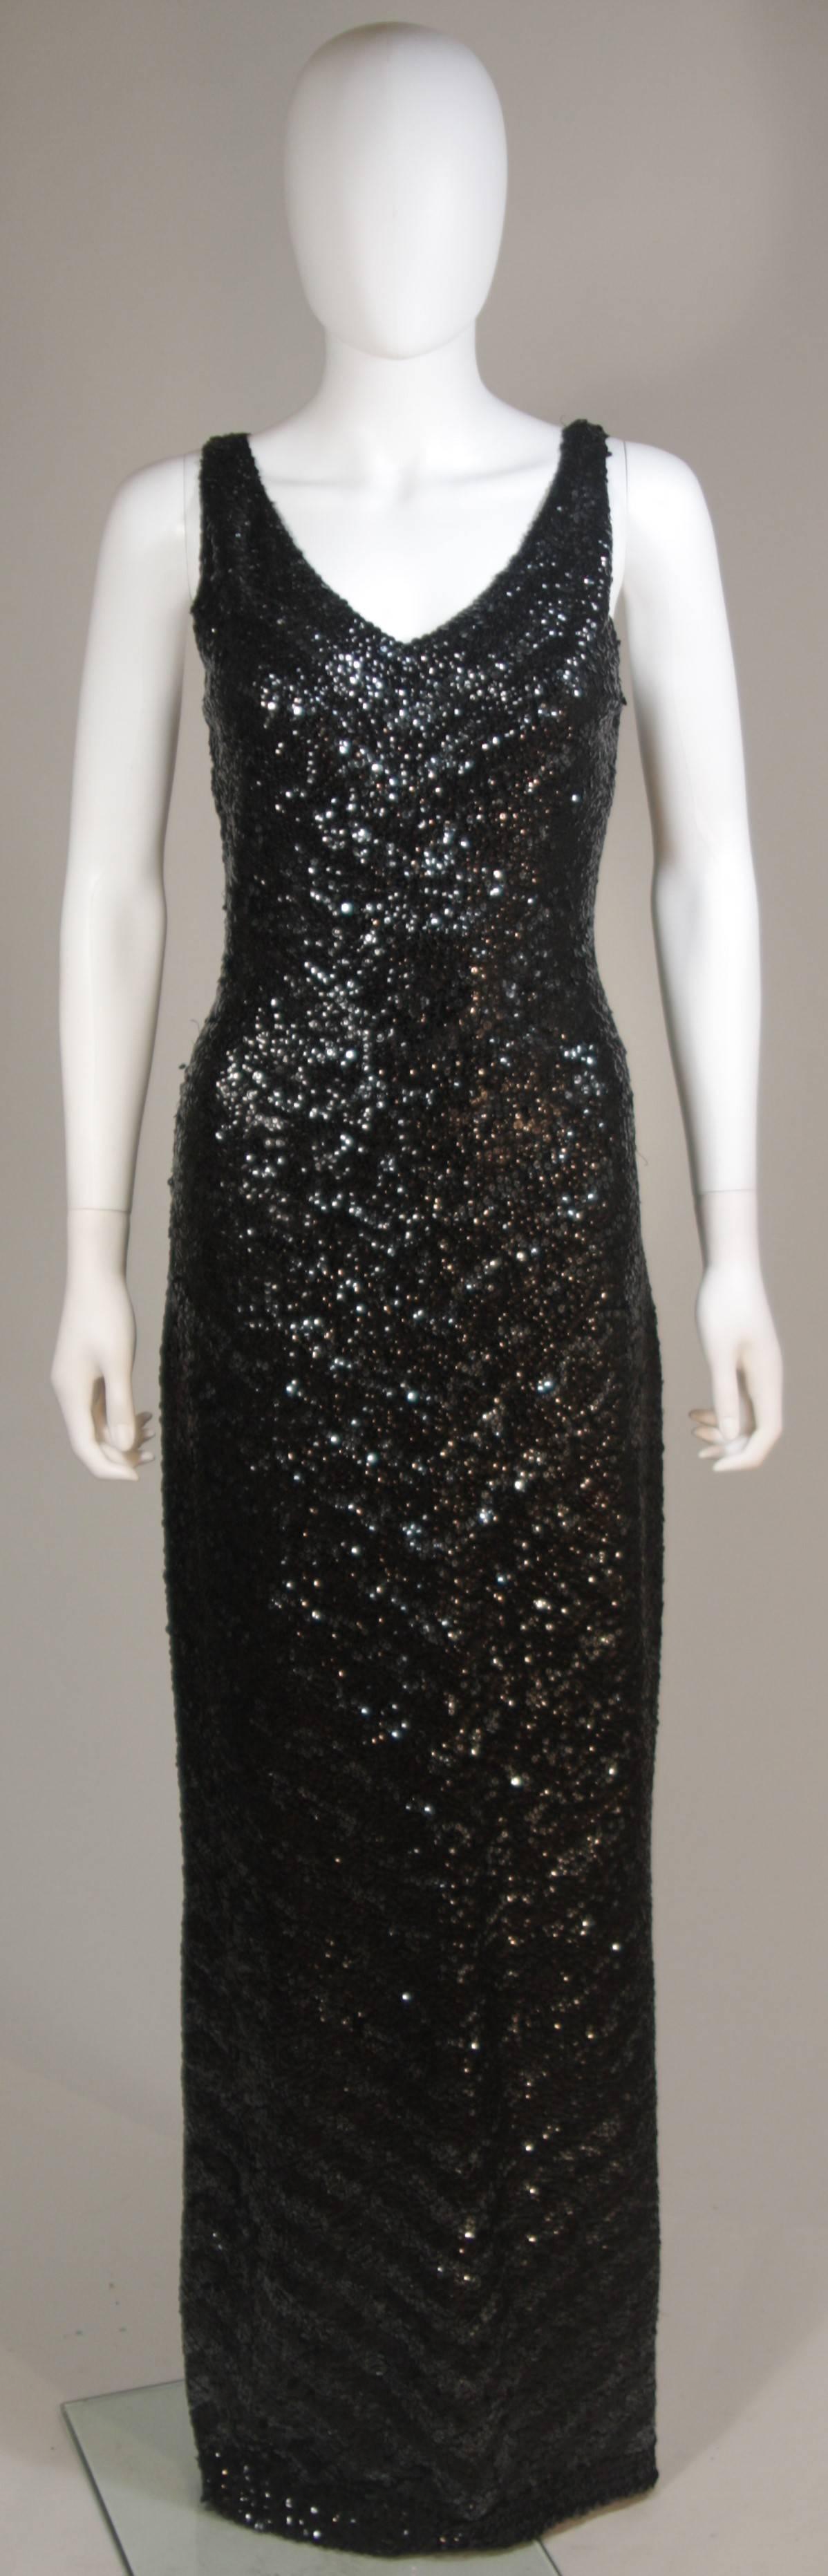  This Gene Shelly's International  gown is composed of a stellar stretch knit black wool with sequins. There is a center back zipper closure, v-neckline, and small side slit on the left side. Superb design. In excellent vintage condition. 

 